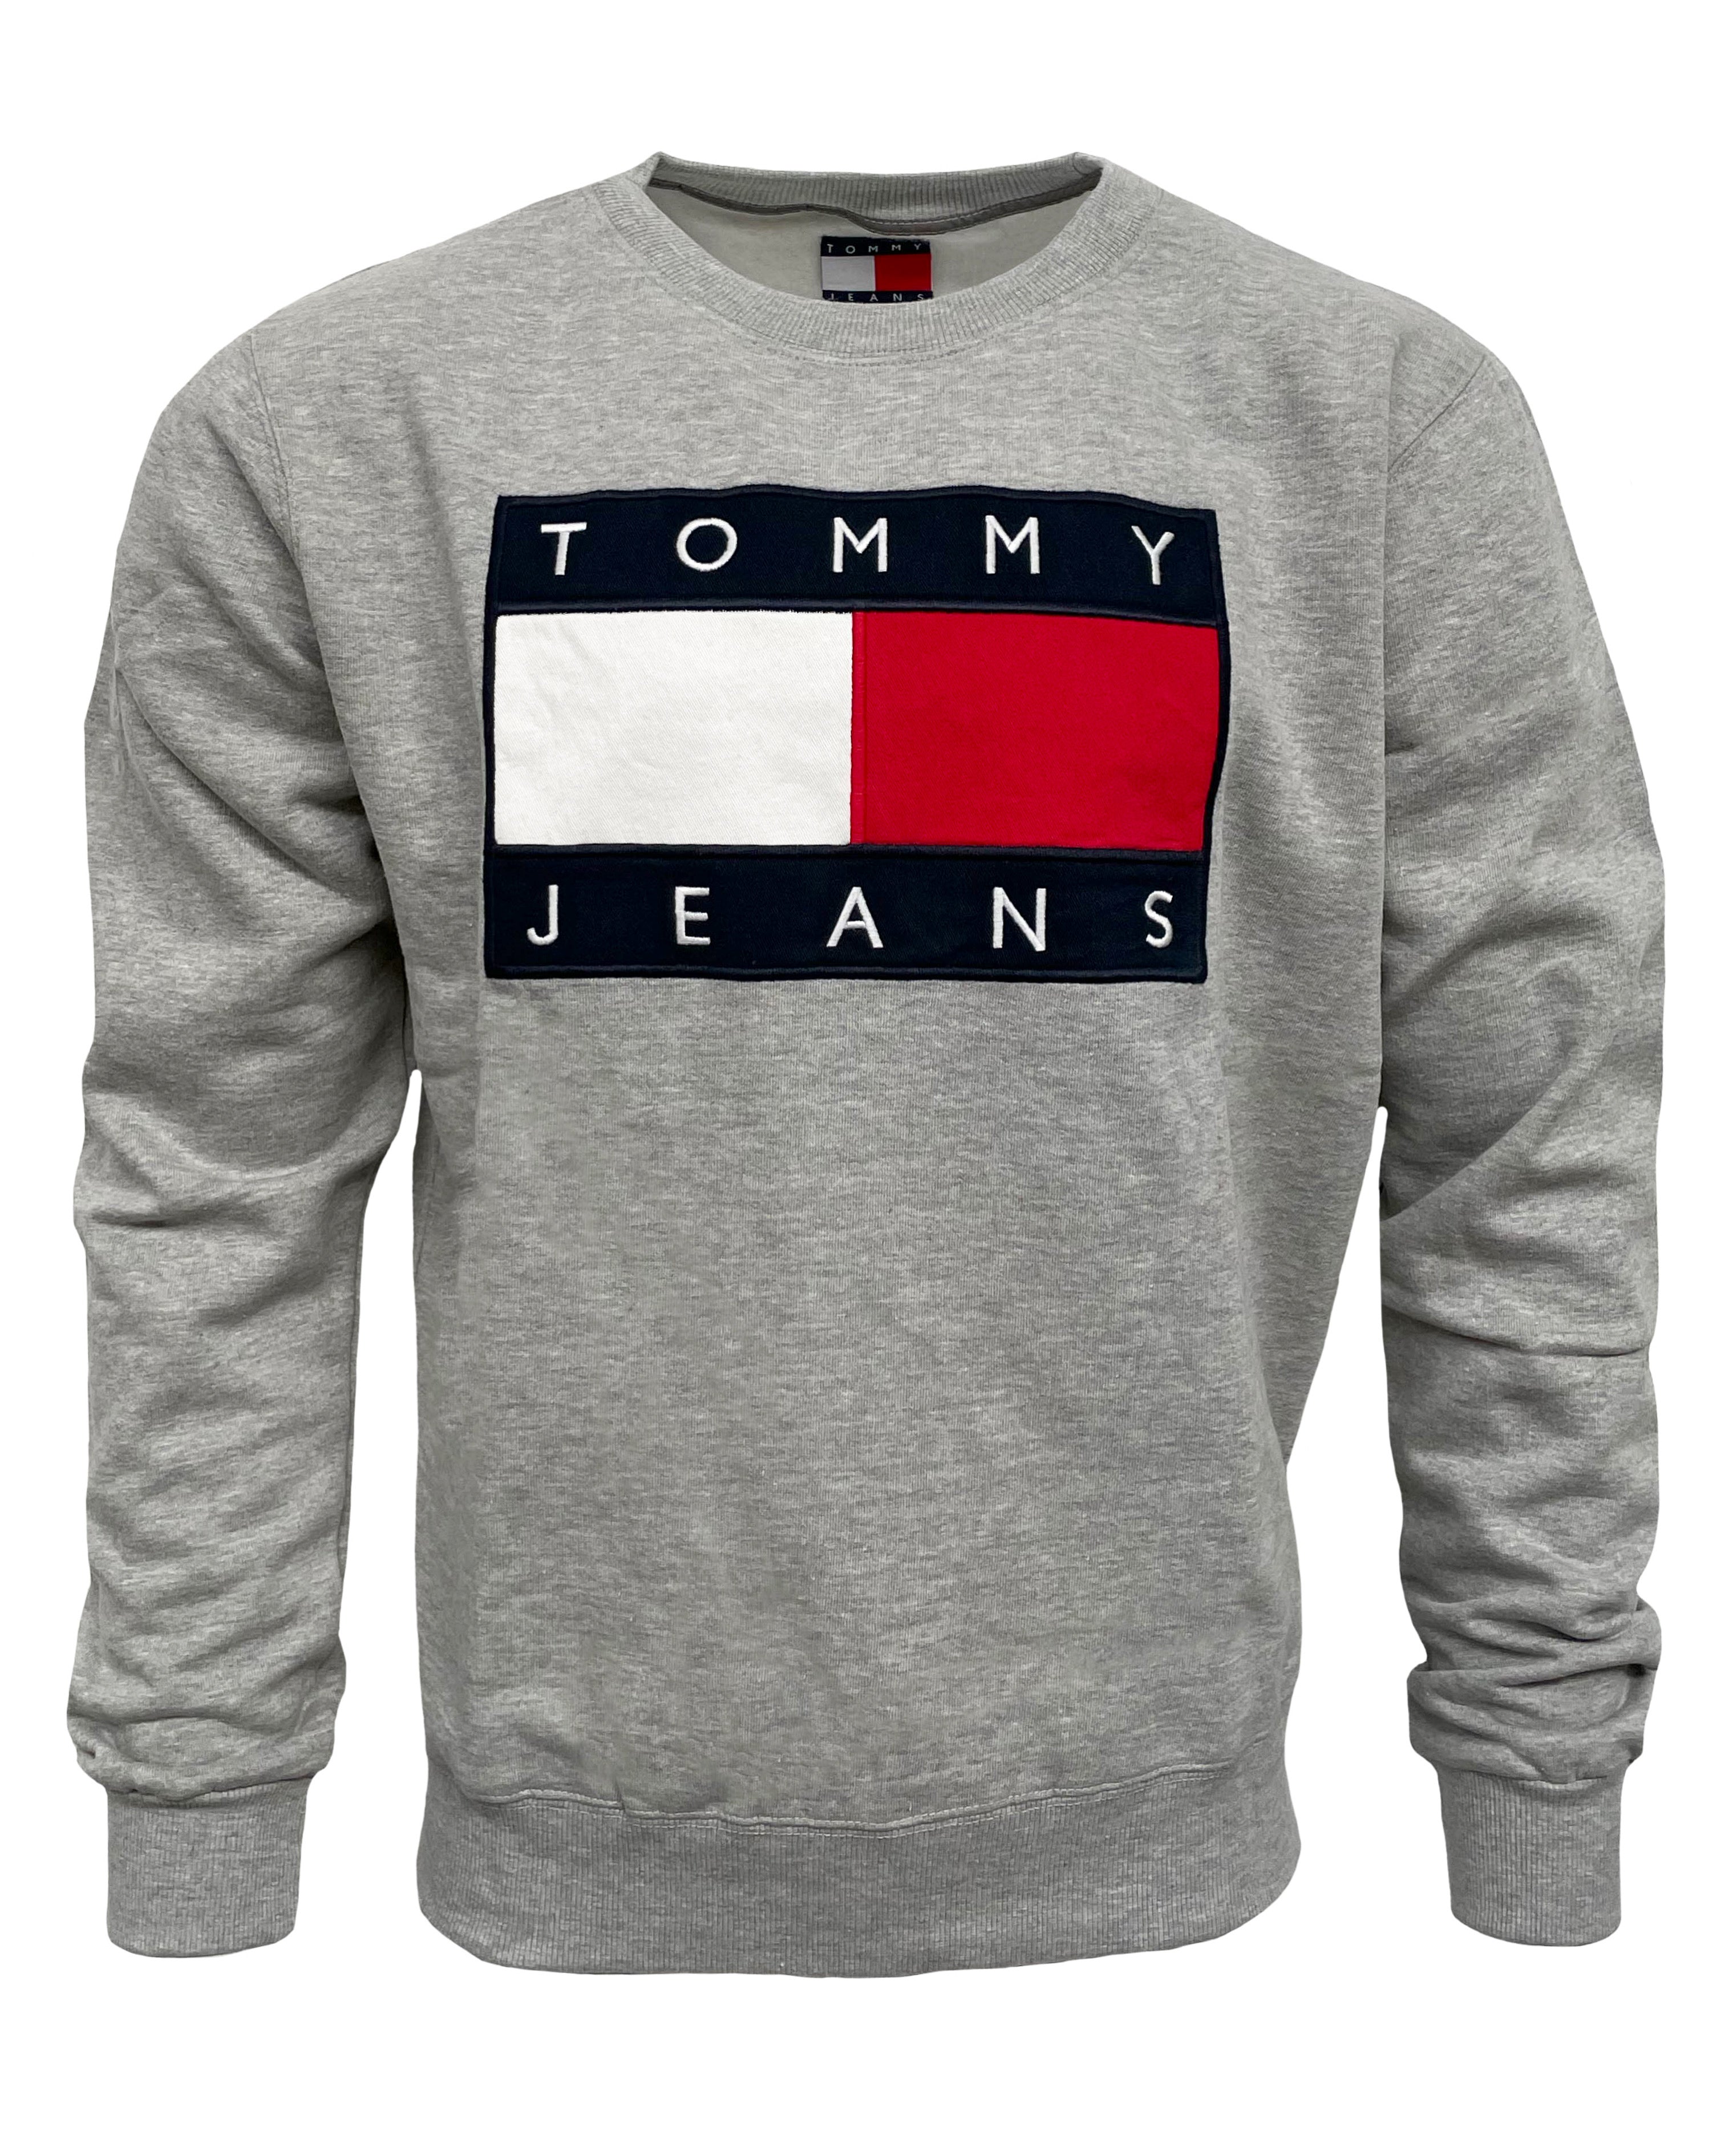 Tommy Jeans Grey Logo Jumper - Concept Six